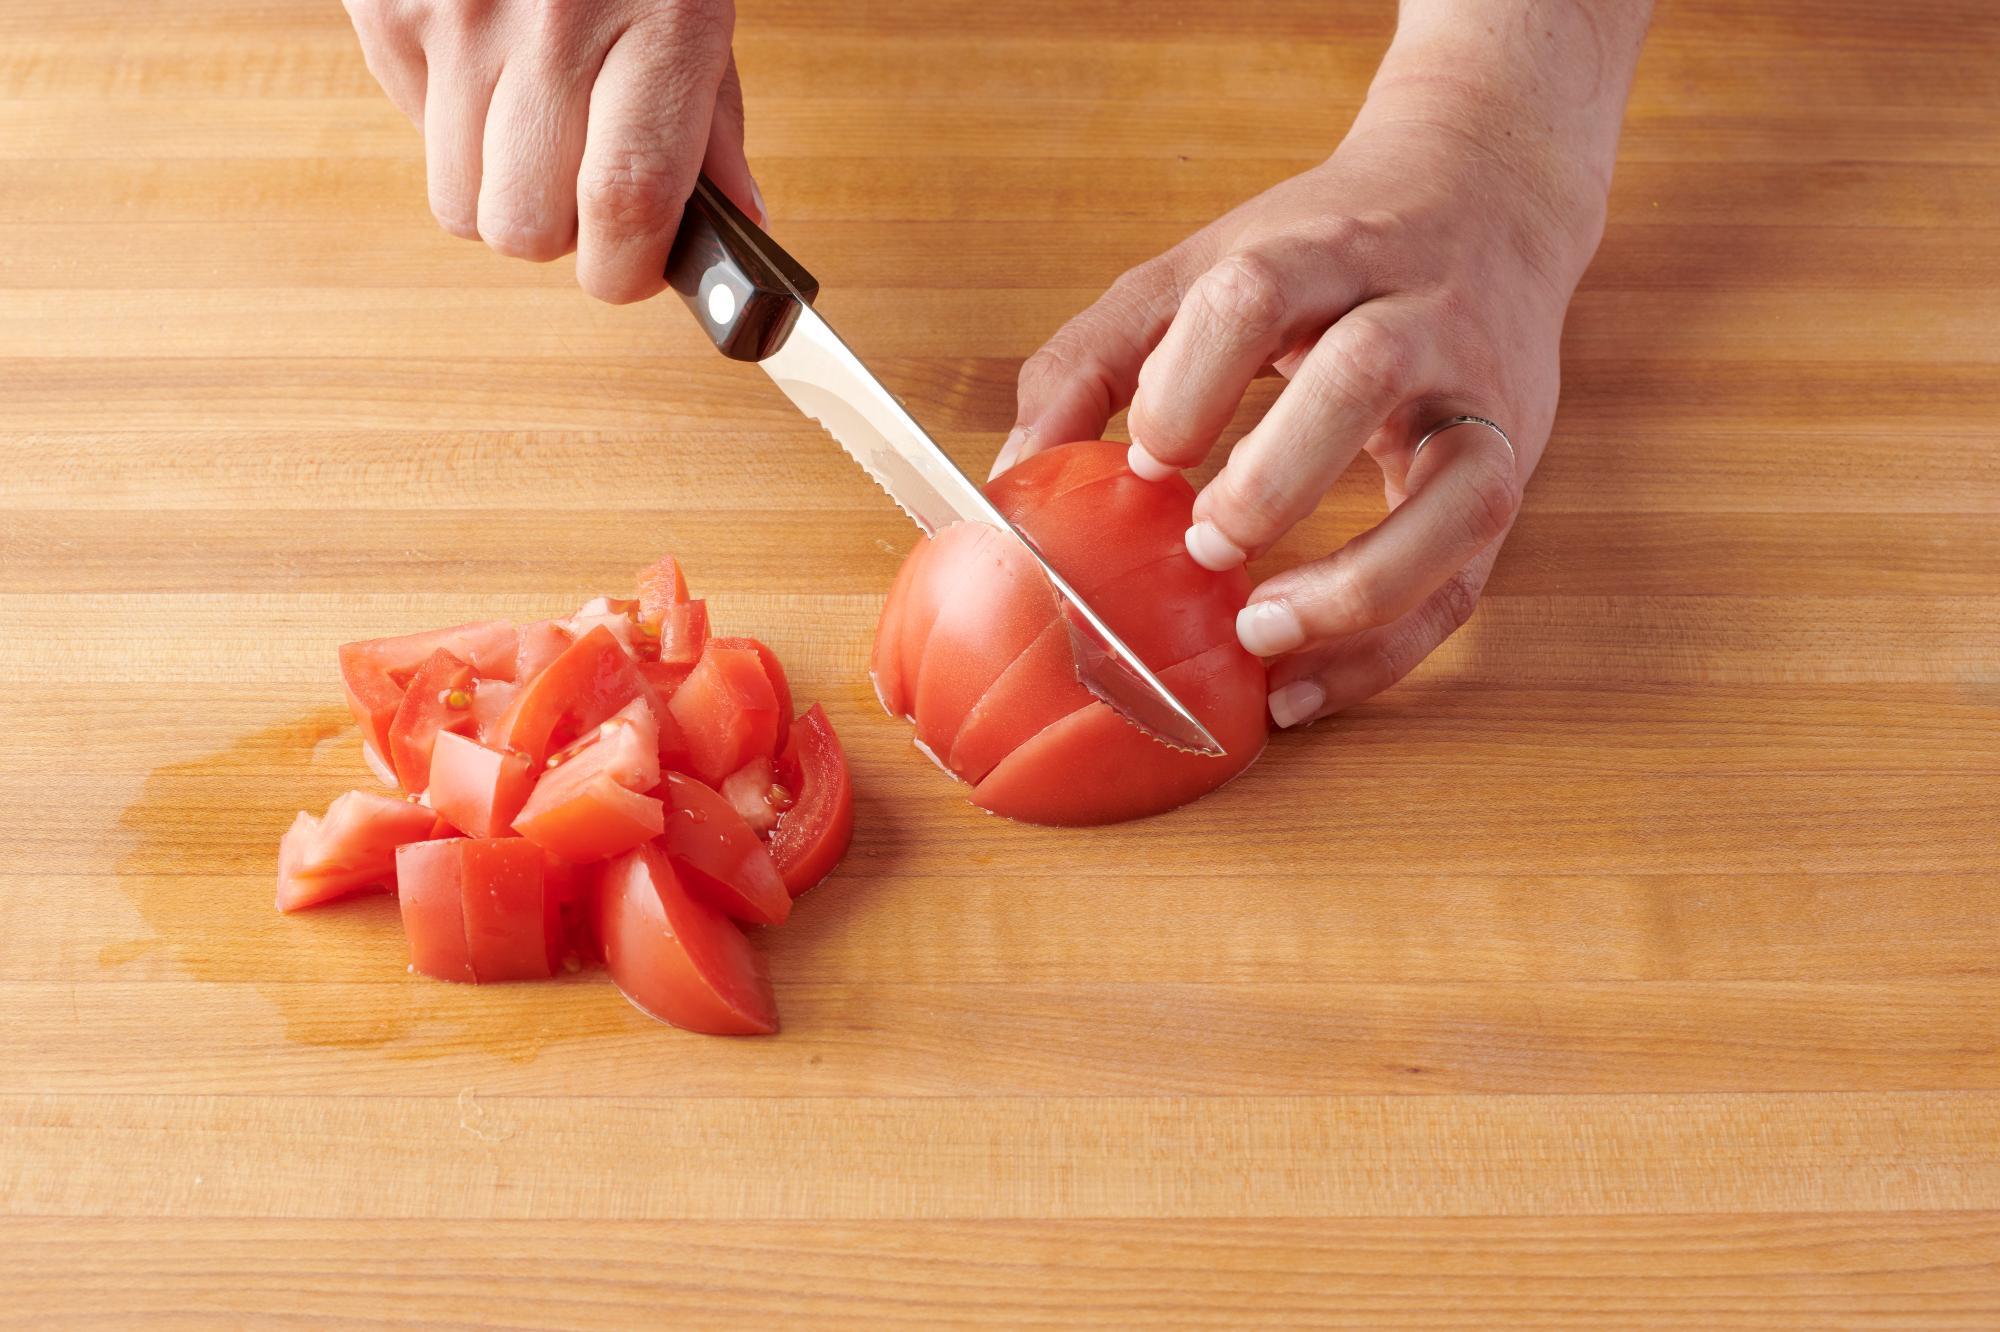 Chopping the tomatoes with a Trimmer.